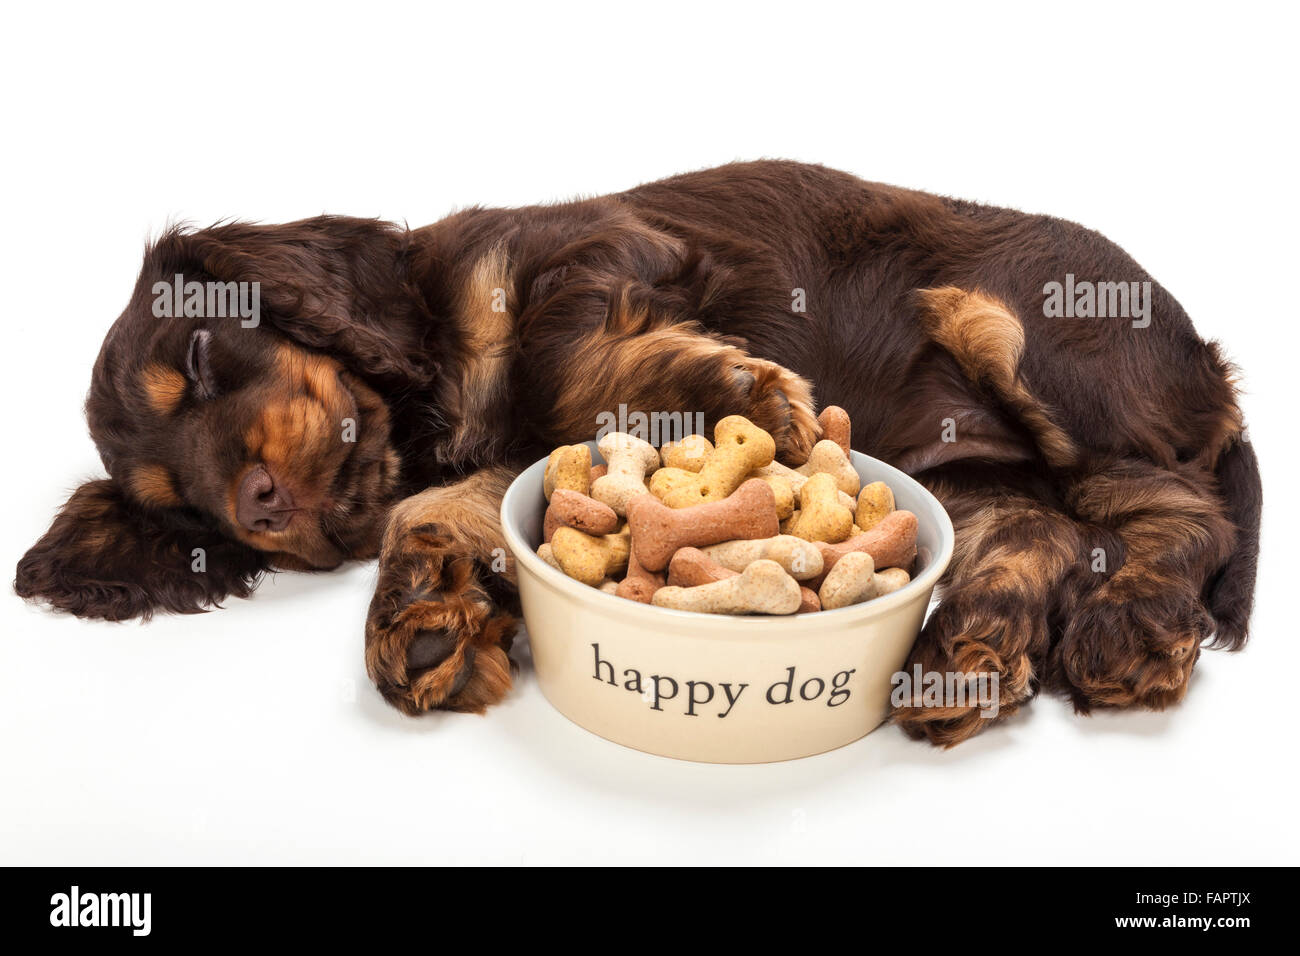 Cute Cocker Spaniel puppy dog sleeping by Happy Dog bowl of boned shaped biscuits Stock Photo